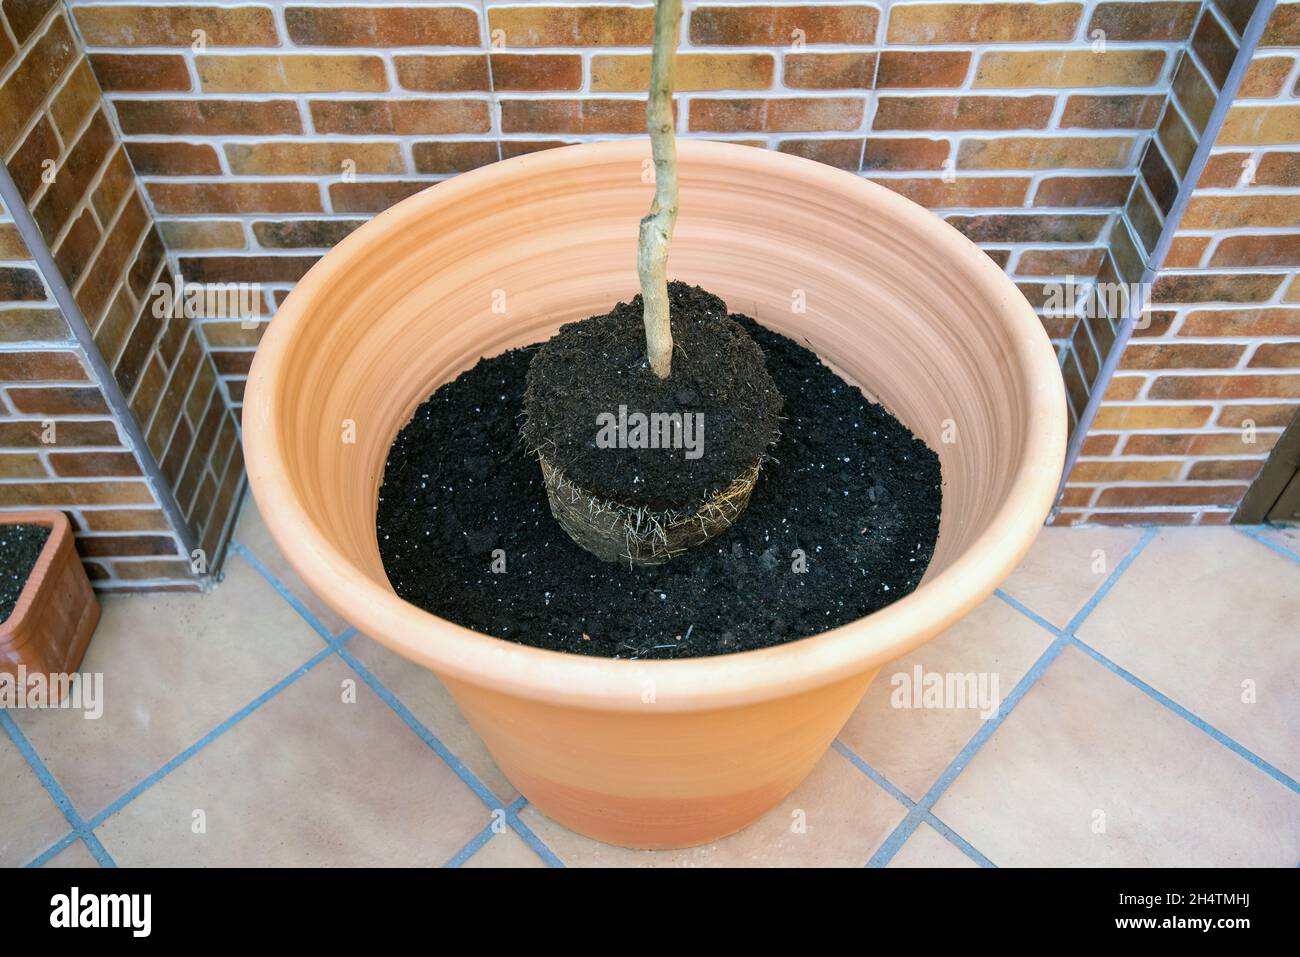 Large circular pot, half filled with soil with nutrients and a small tree to be planted on top. Stock Photo